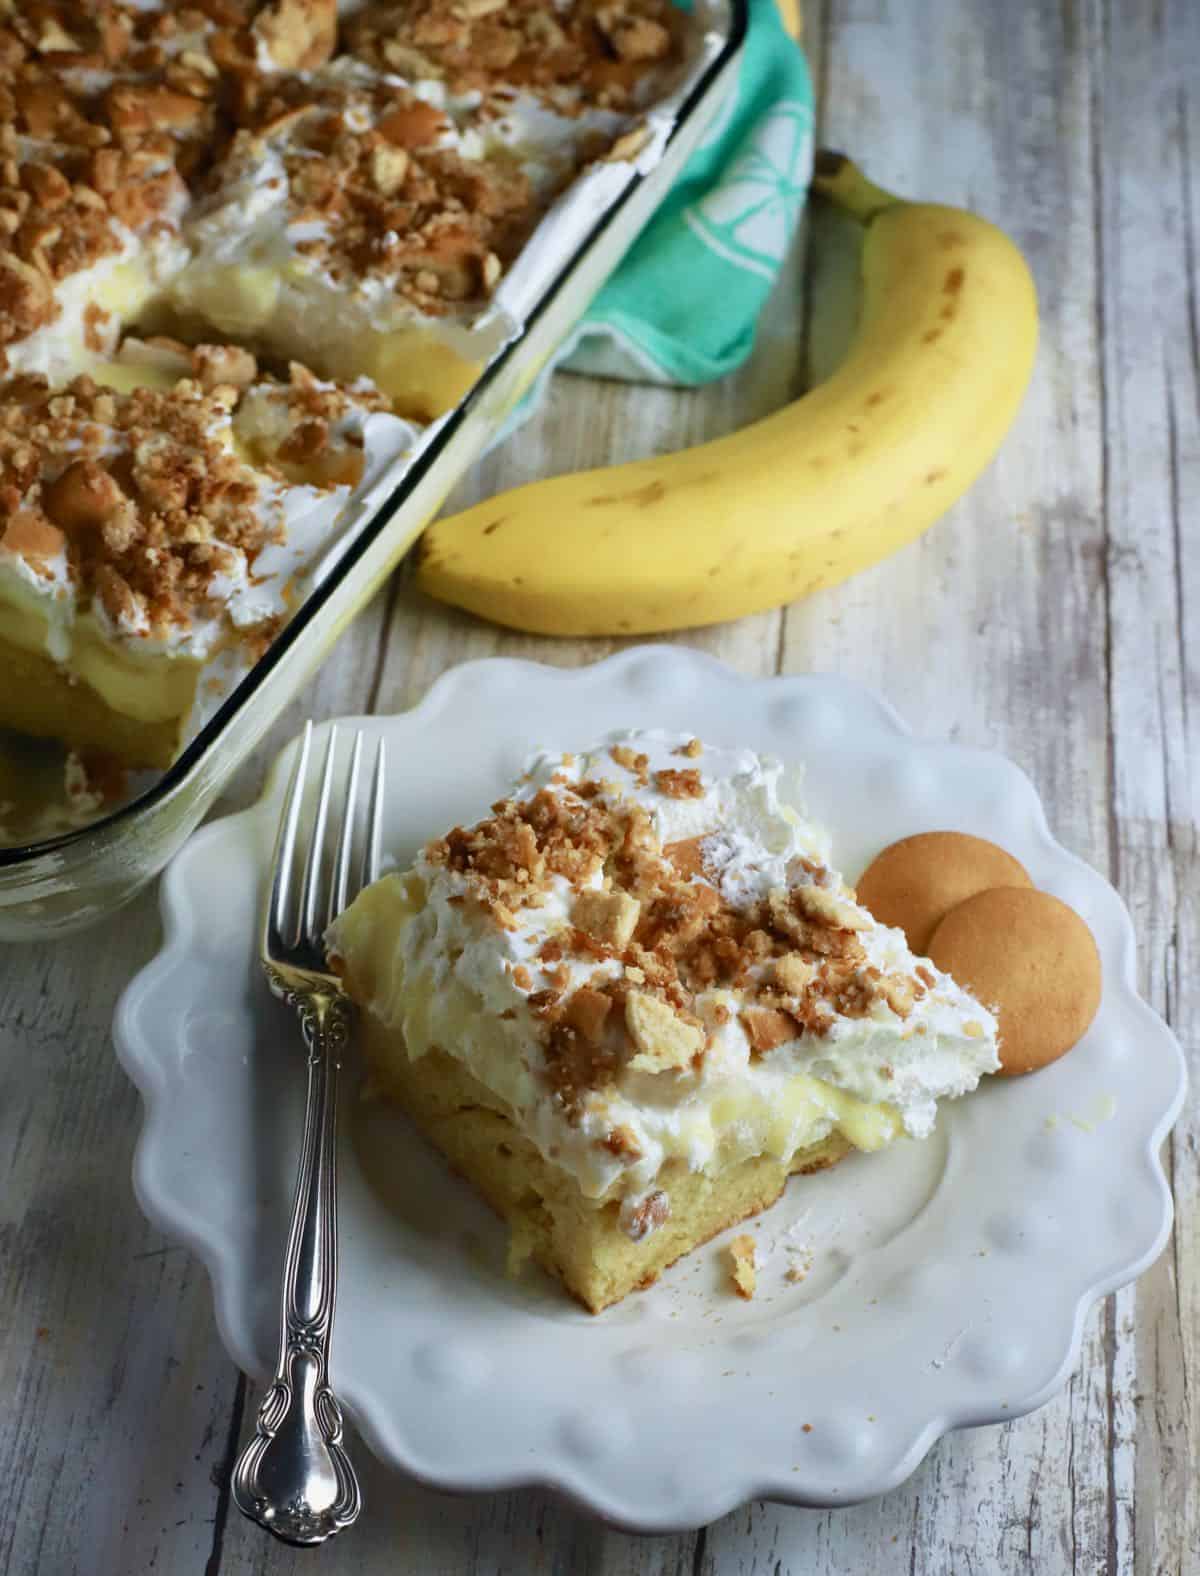 A square of banana pudding cake on a plate next to a banana. 